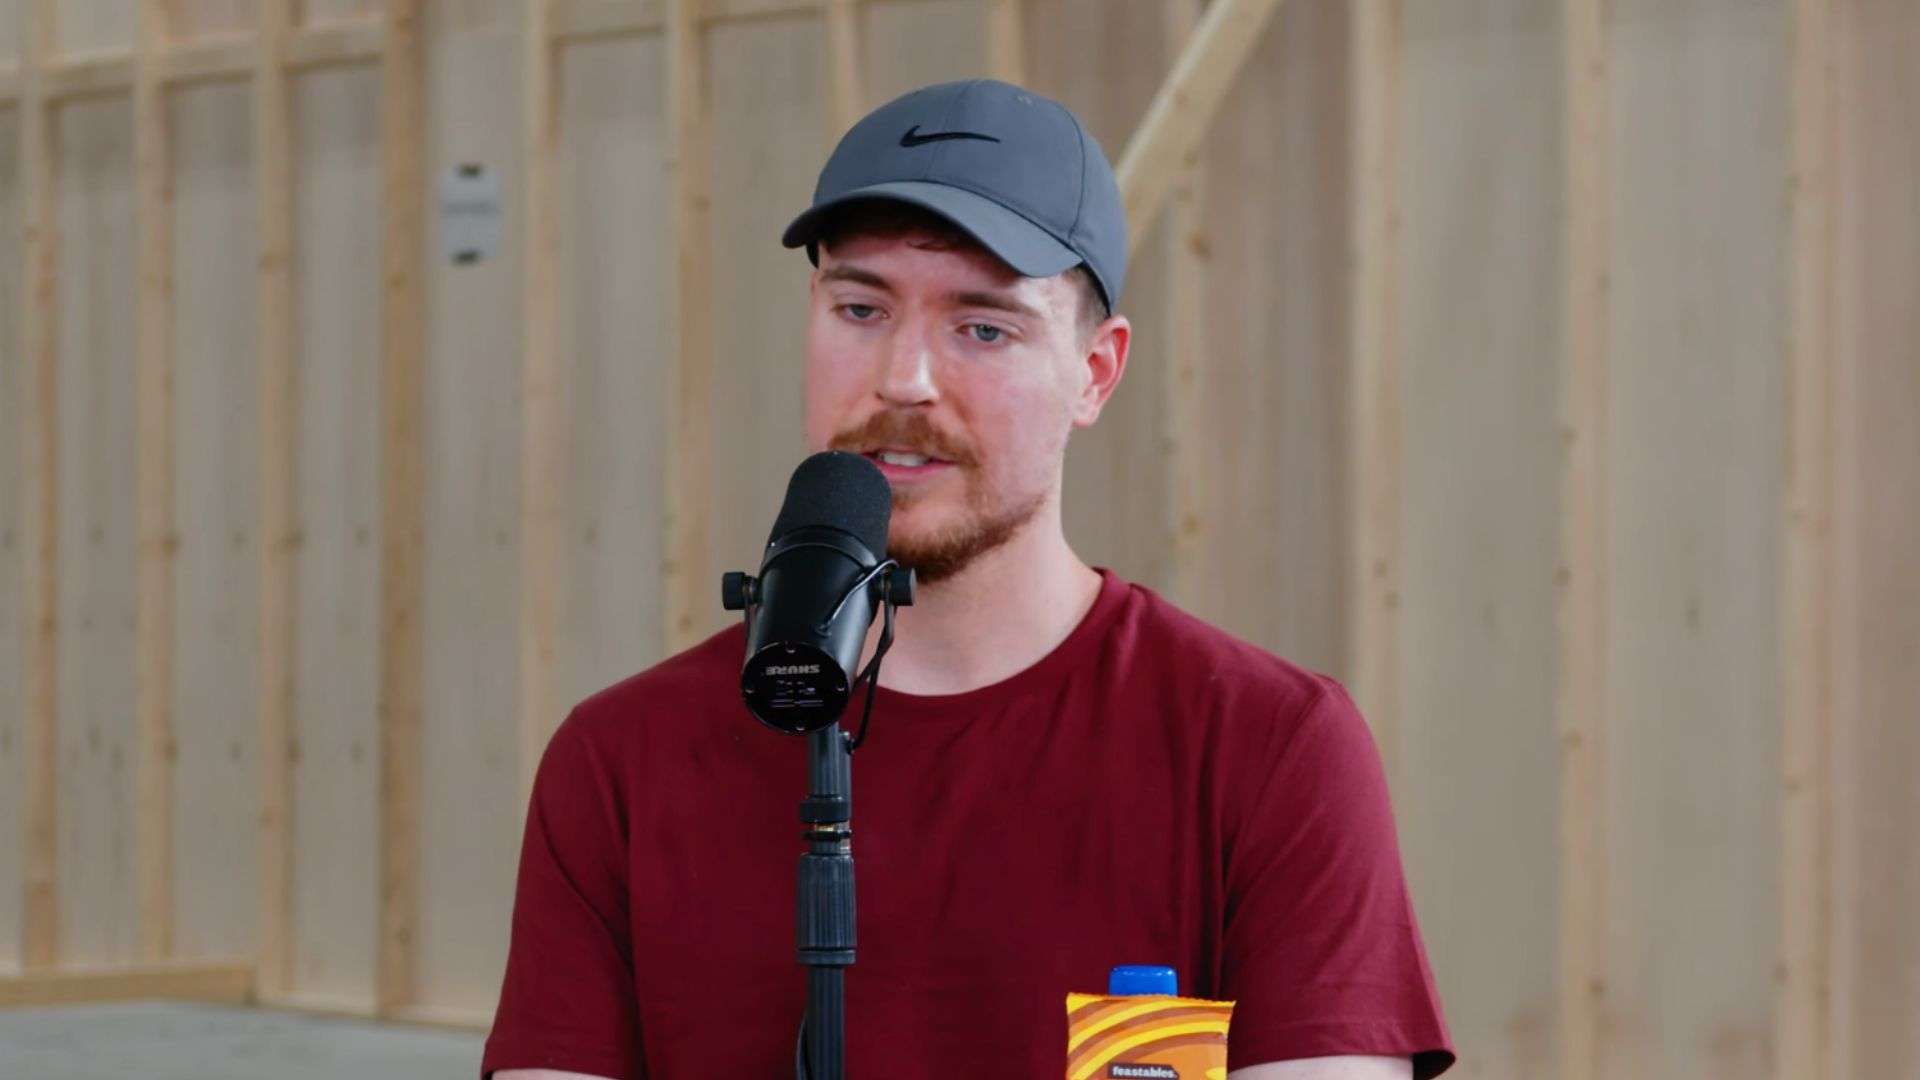 MrBeast talking into mic wearing red shirt and grey hat